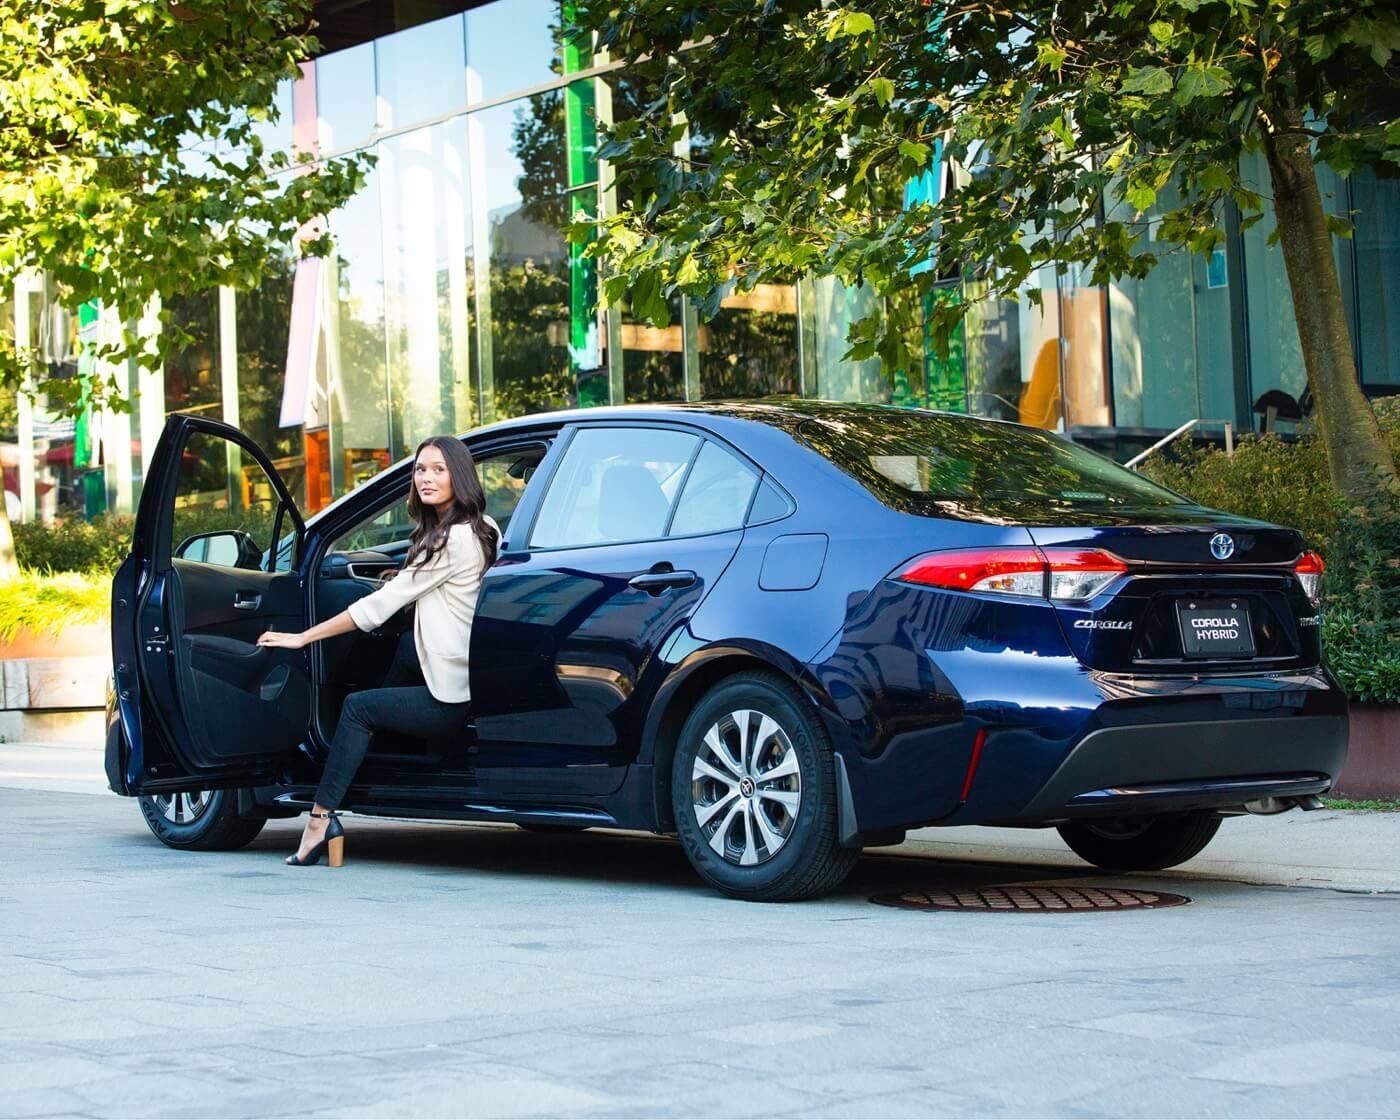 Rear 3/4 side view of a 2022 Toyota Corolla Hybrid with a woman getting out of the vehicle